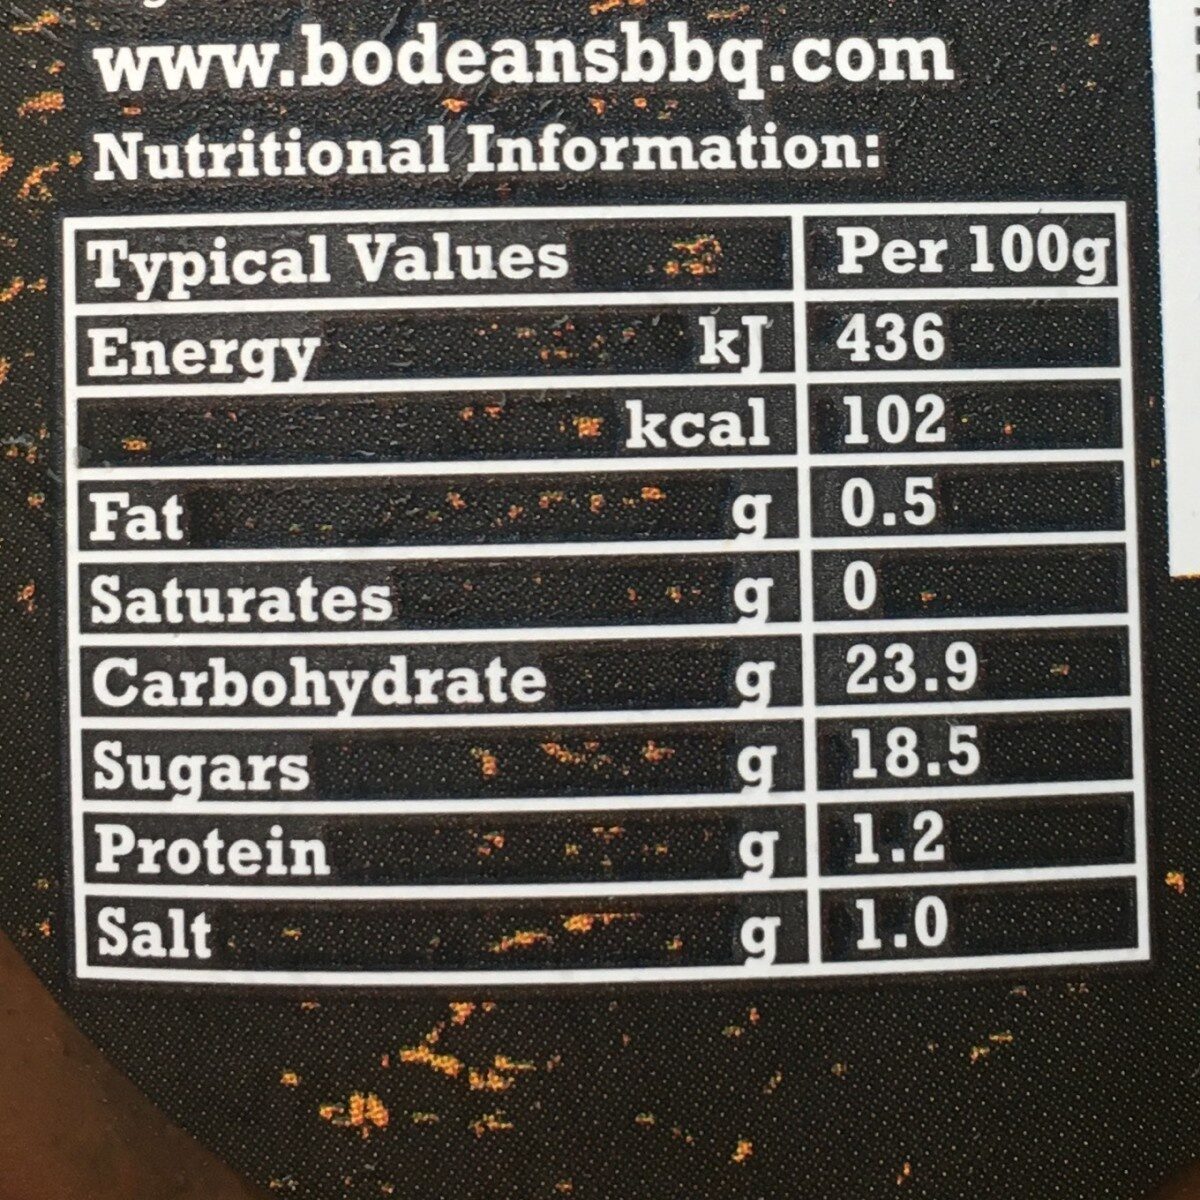 Bodean's Smoked Hickory BBQ Sauce - Tableau nutritionnel